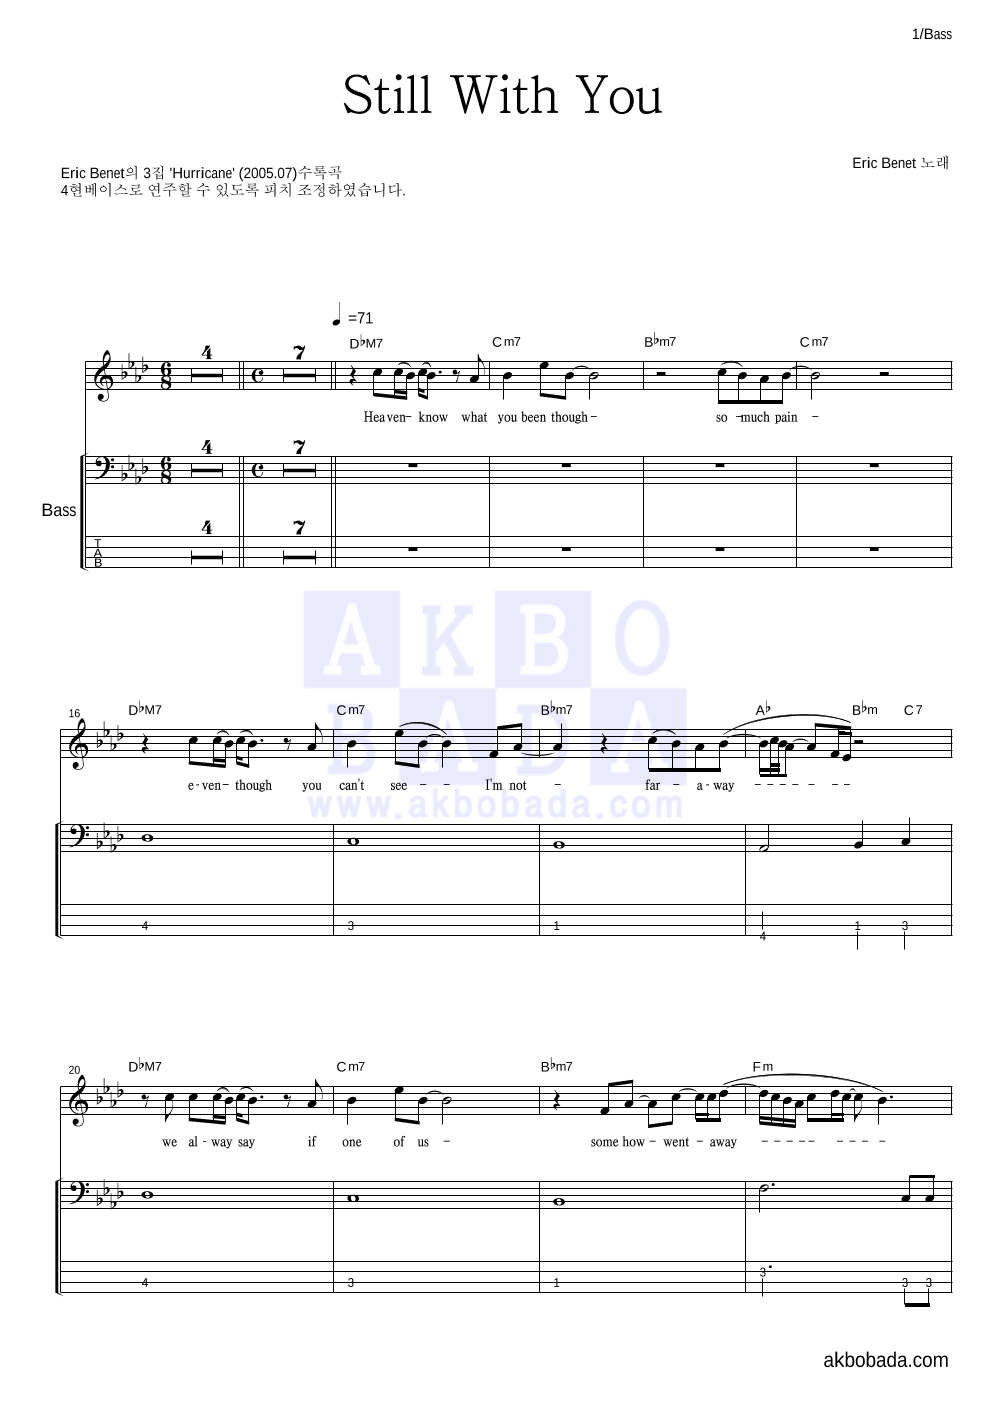 eric benet still with you piano sheet pdf